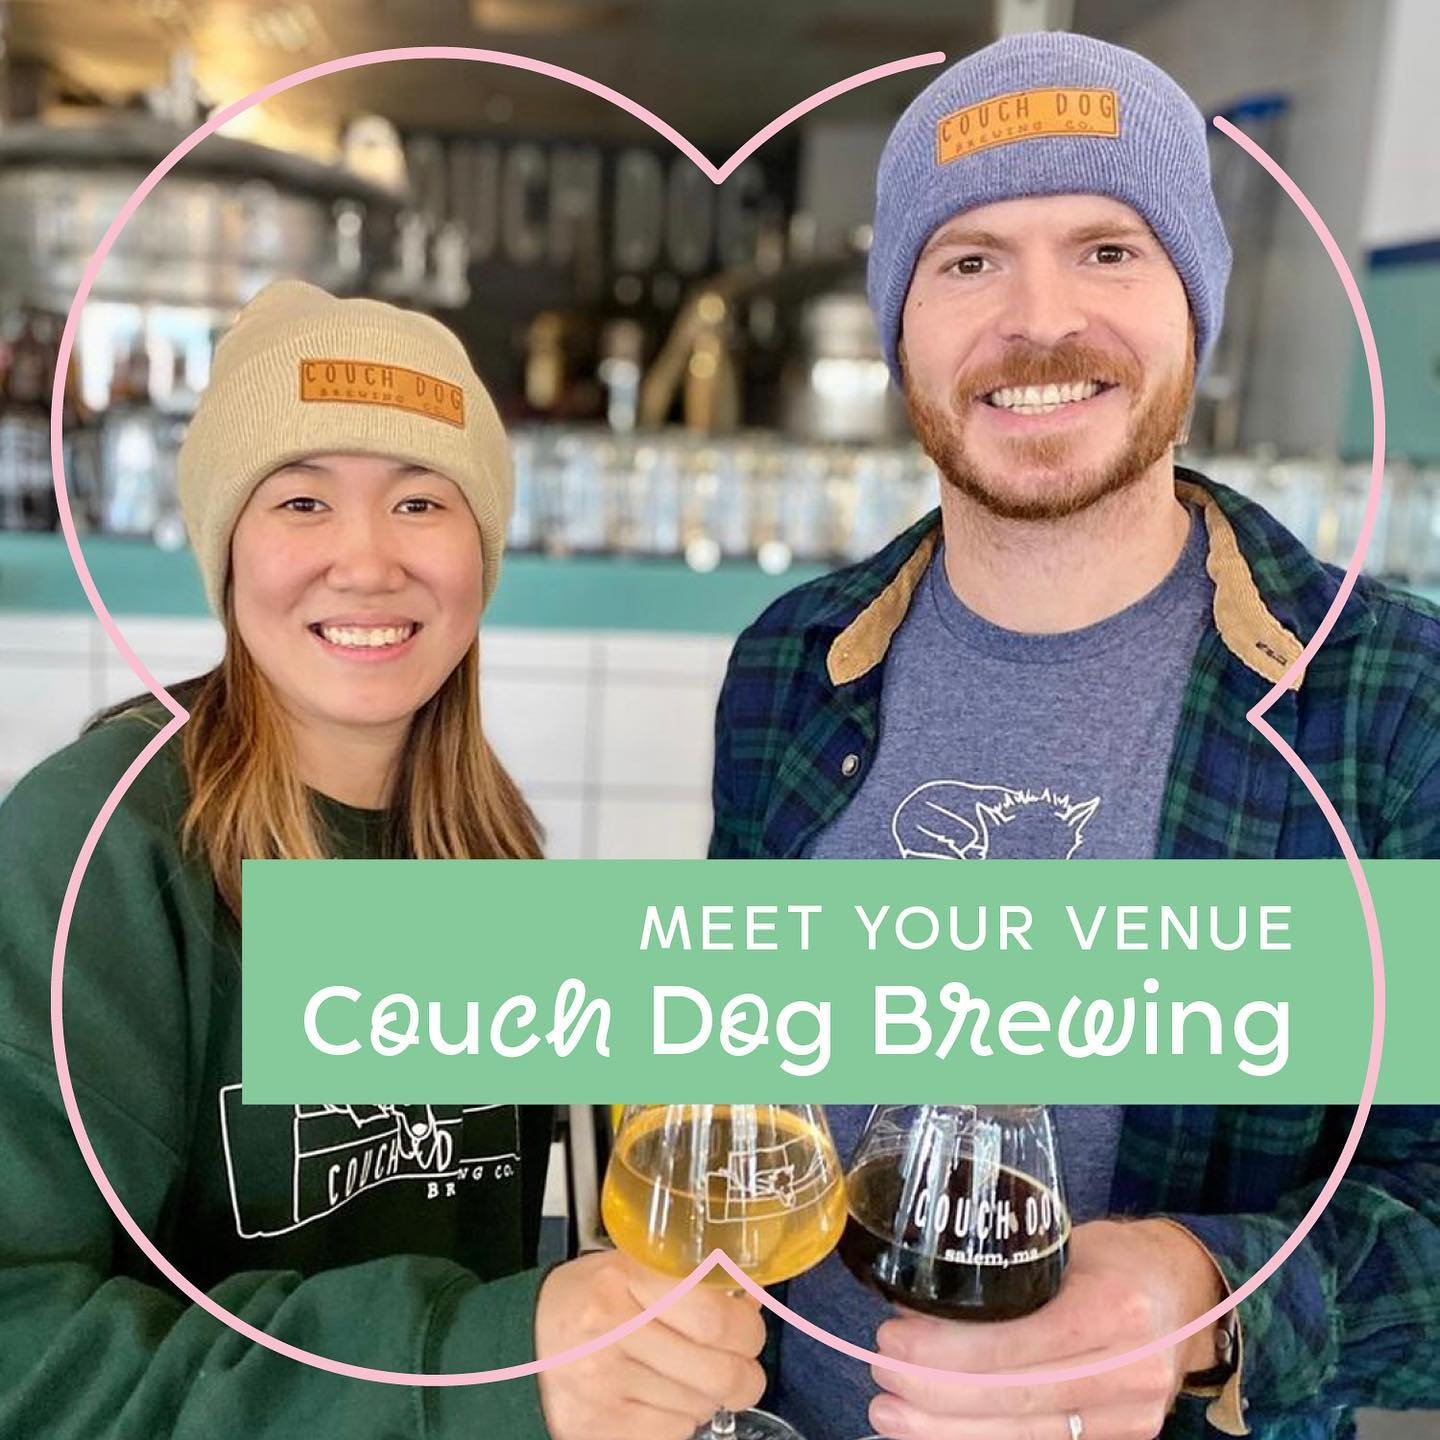 Meet your venue! Couch Dog Brewing Co. is an AAPI-owned microbrewery and taproom based in downtown Salem, MA. Our focus is on fun, aromatic, and Asian-inspired ales, and we aim to bring some diverse and exciting flavors to Massachusetts&rsquo; thrivi